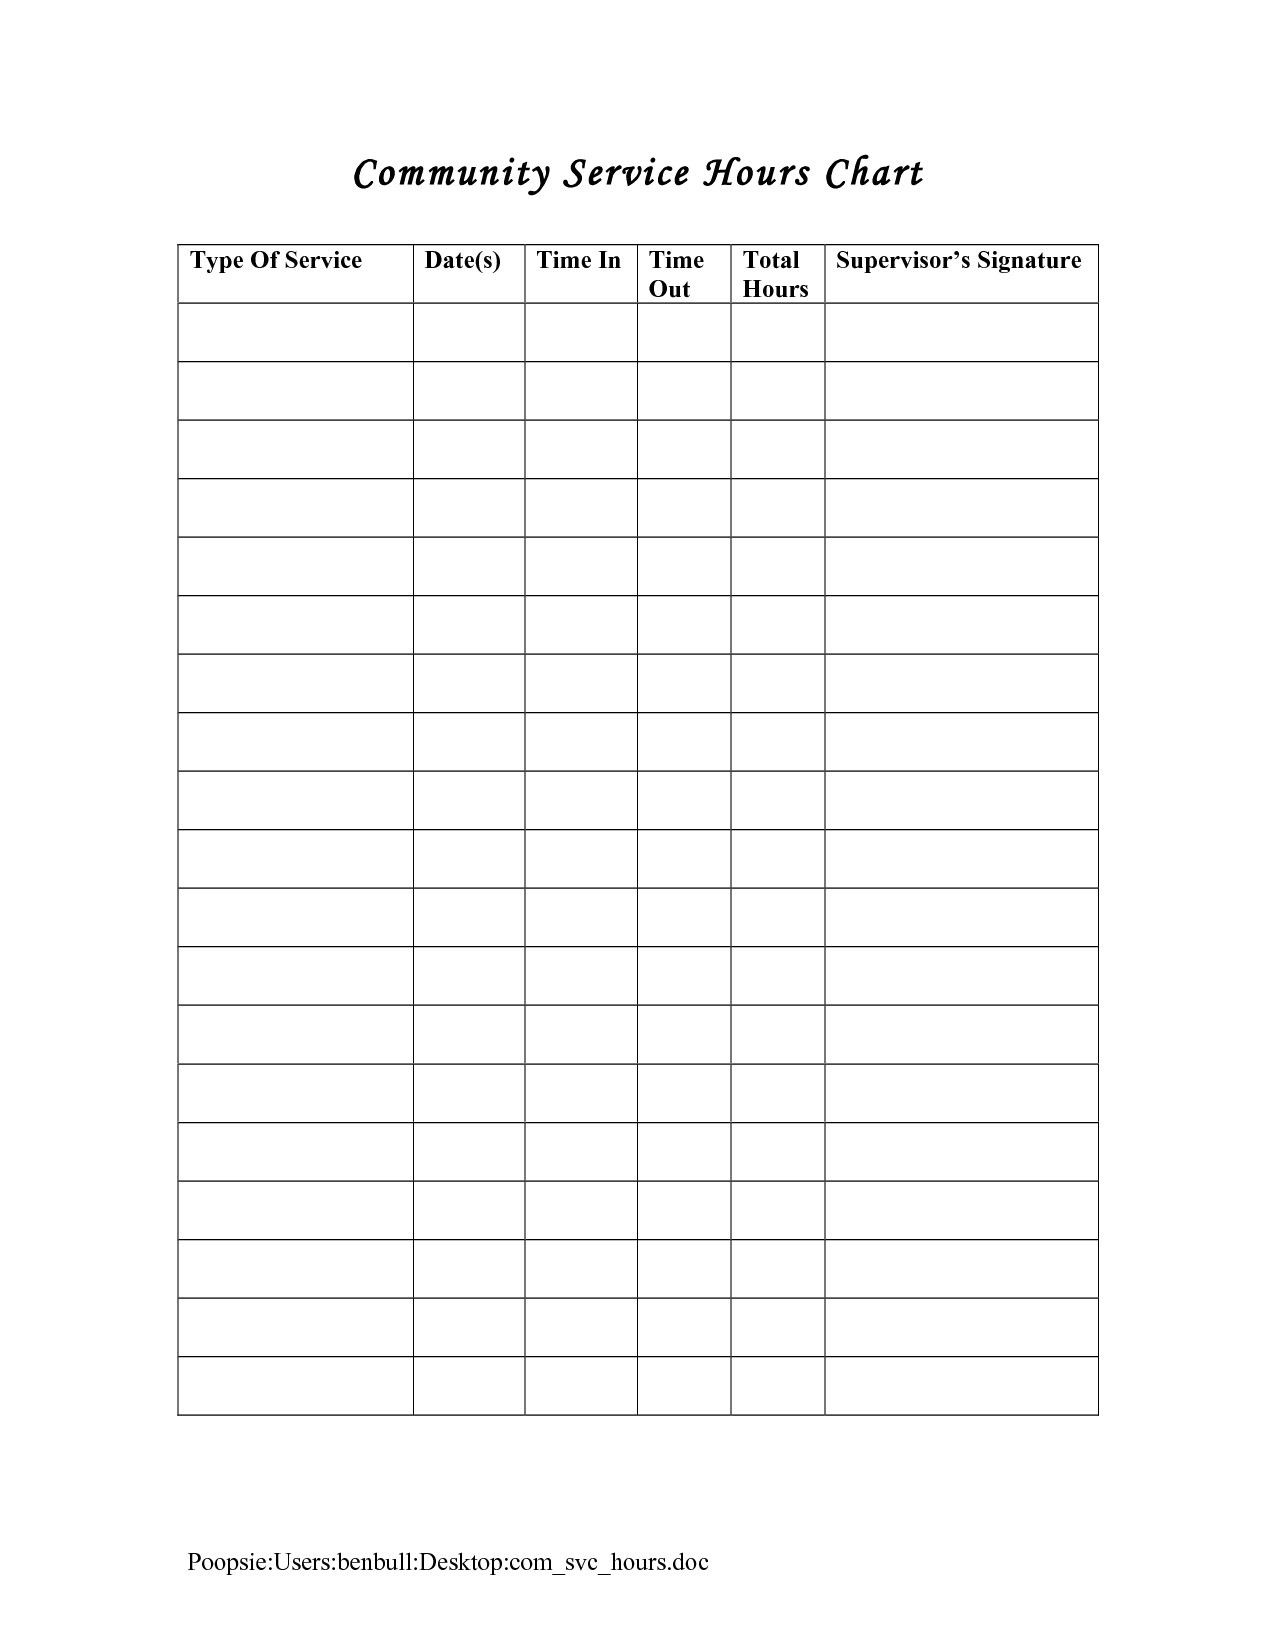 Community Service Hours Template Service Hours Log Sheet Printable